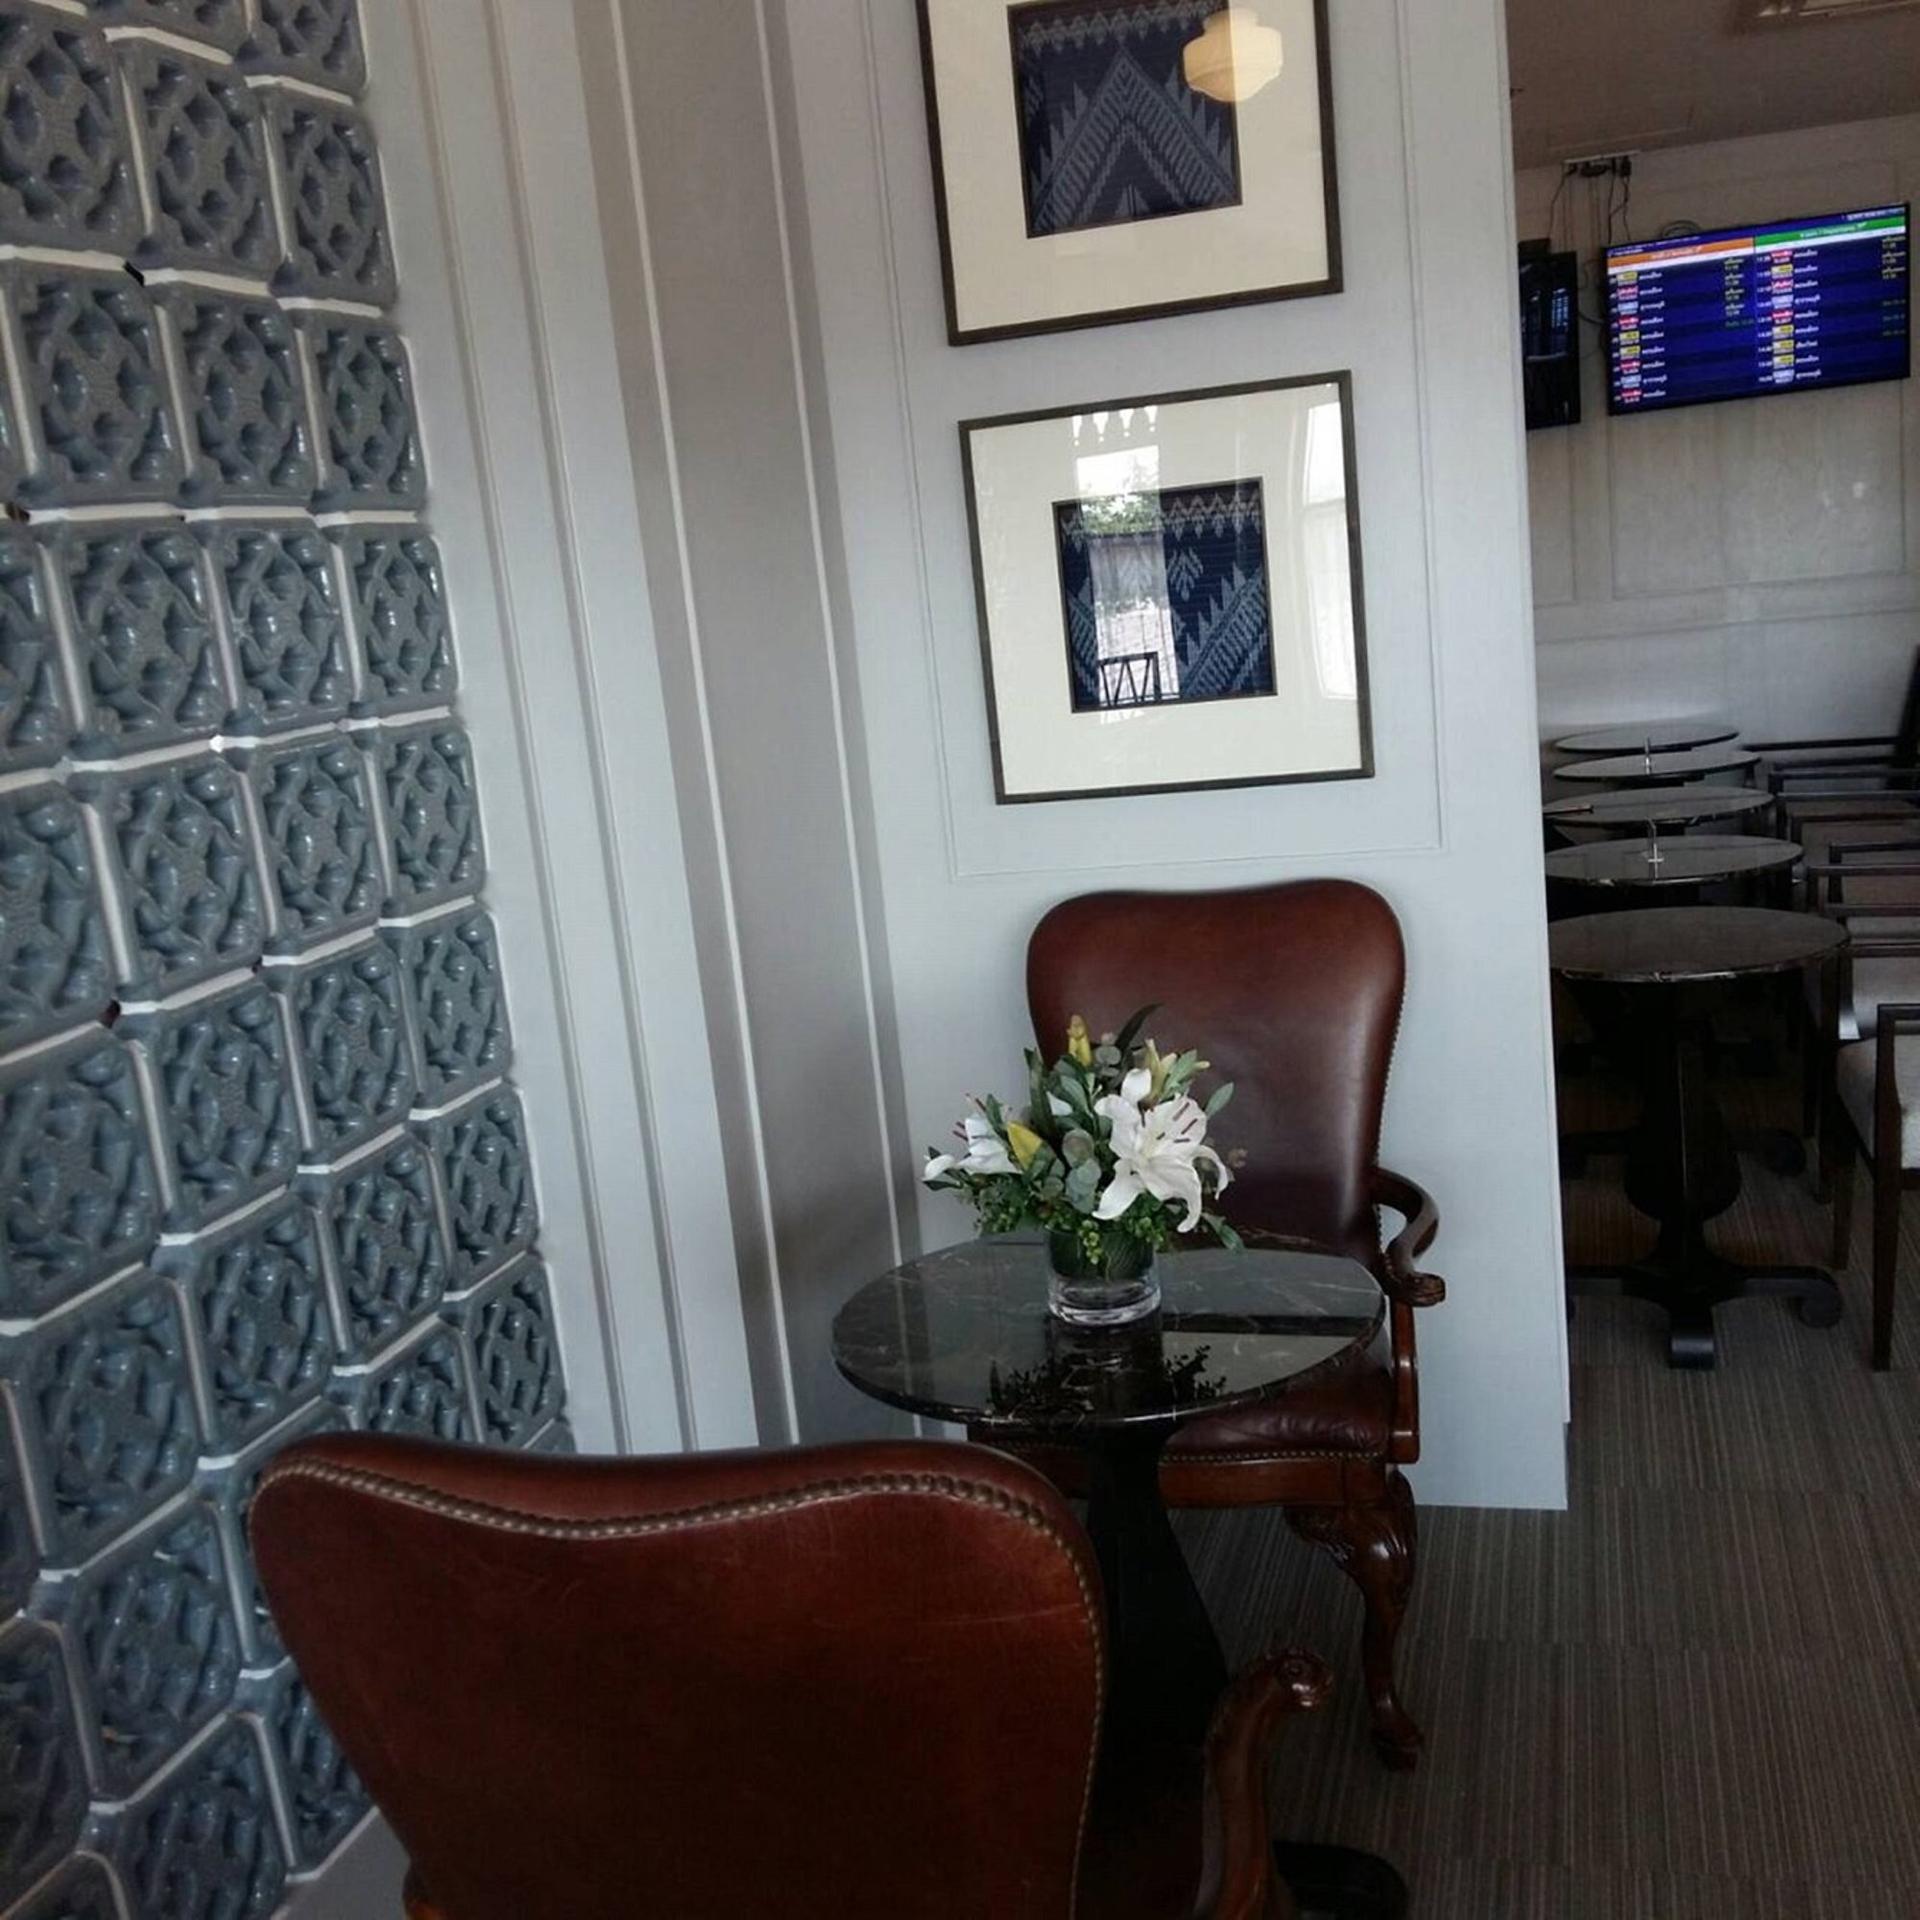 The Coral Executive Lounge image 19 of 26